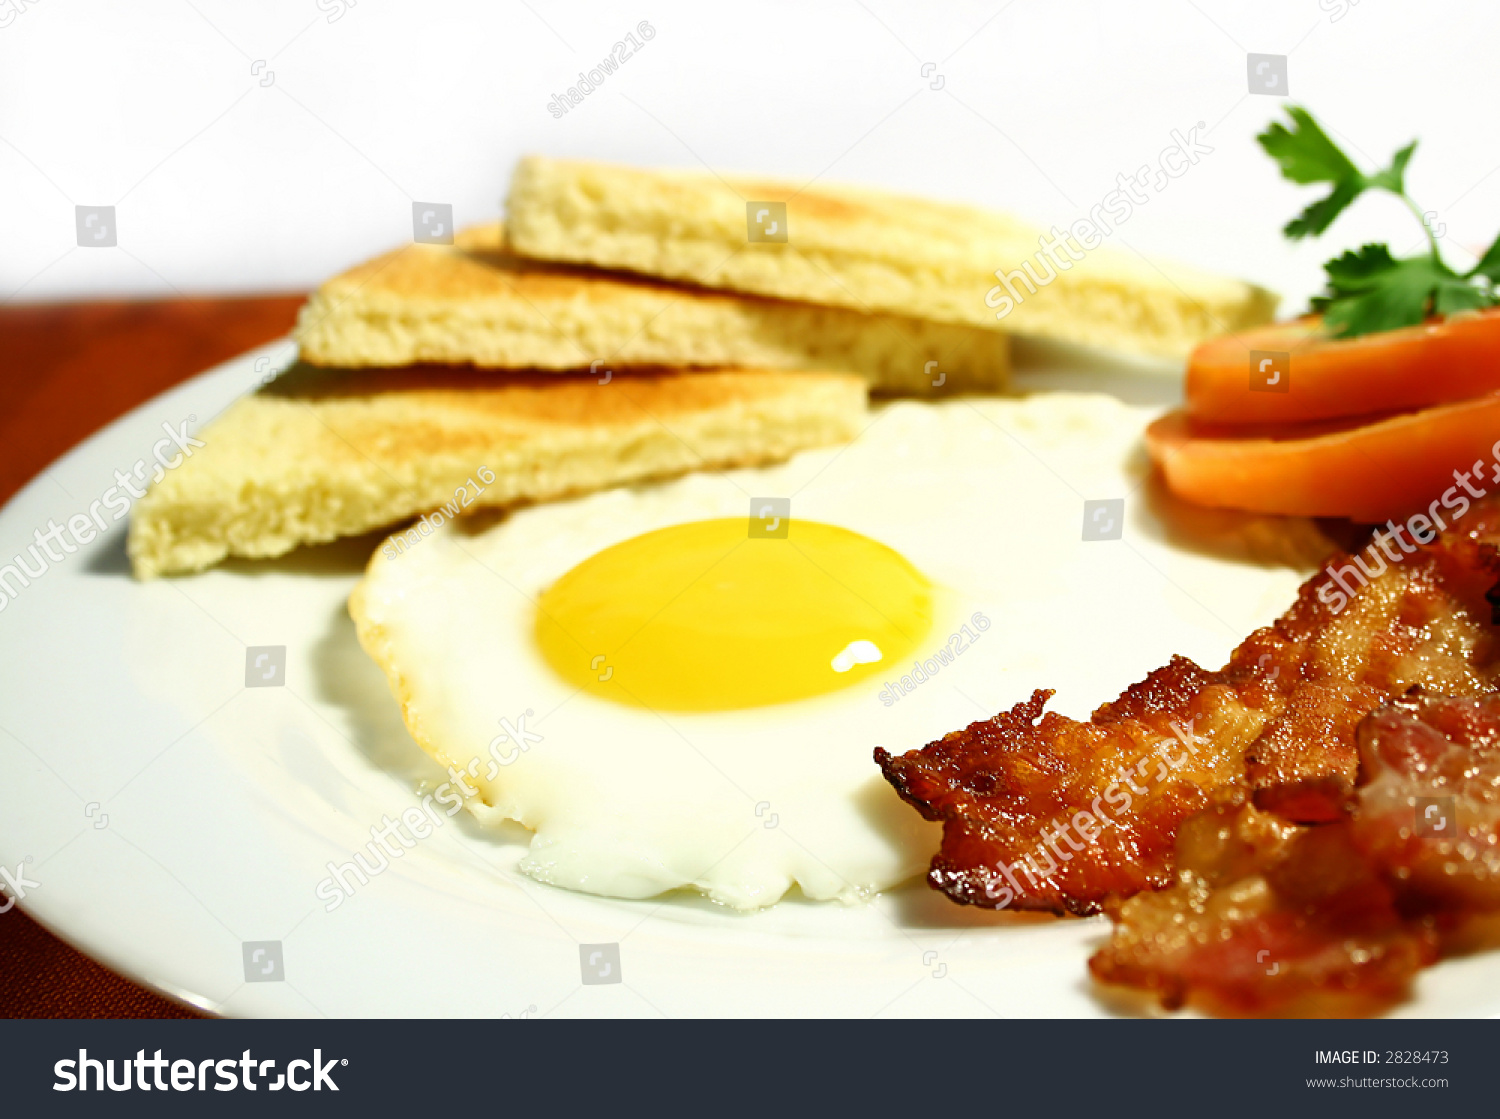 Plate Of Bacon And Egg With Toast Stock Photo 2828473 : Shutterstock